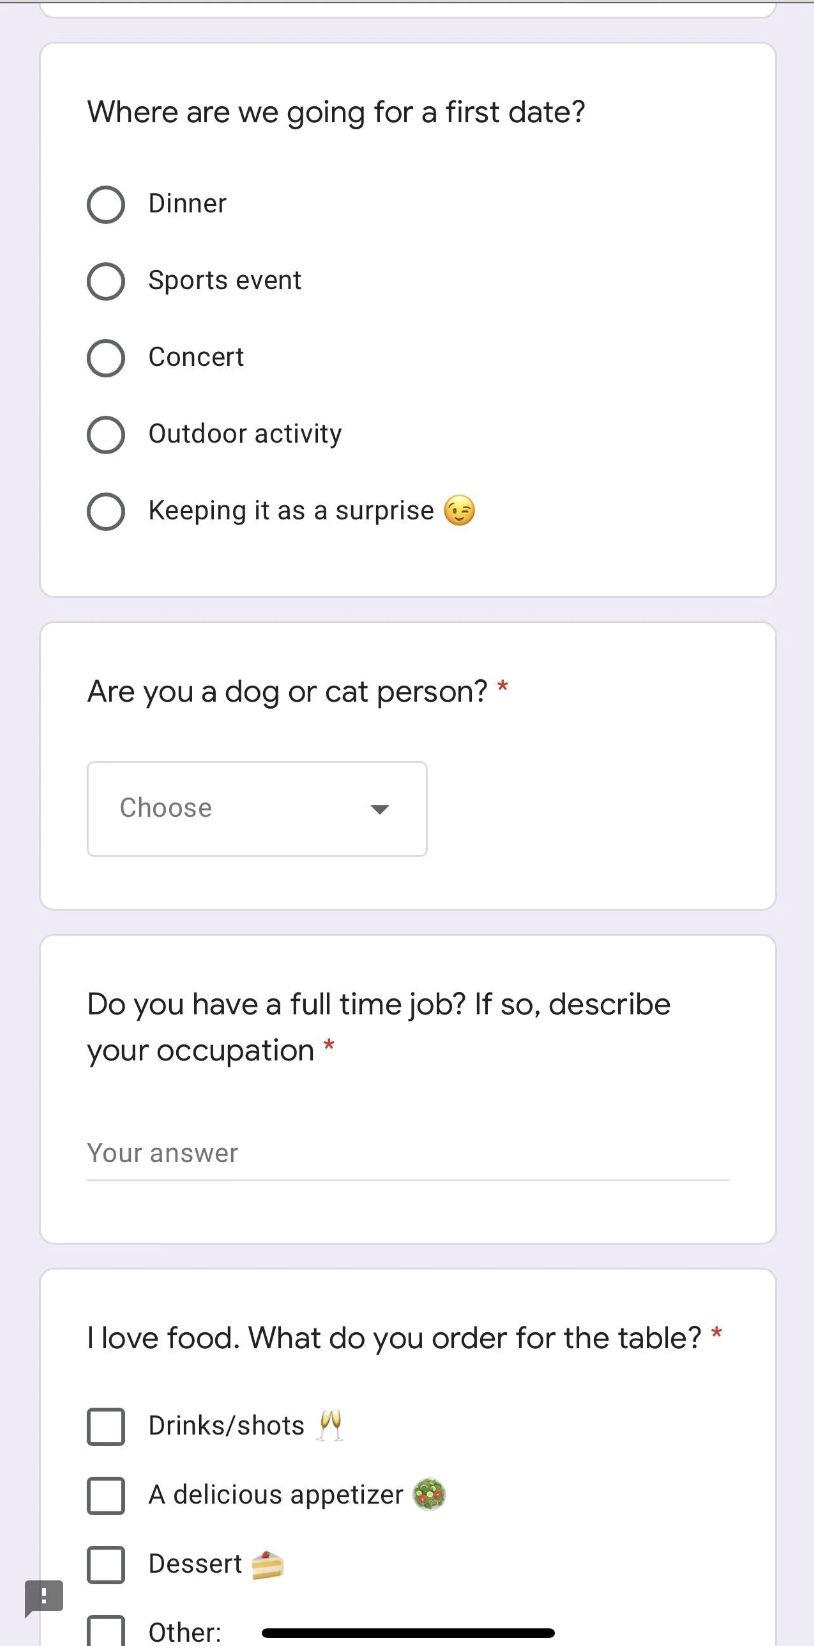 continued survey questions like what do you order for the table, and are they a dog or cat person